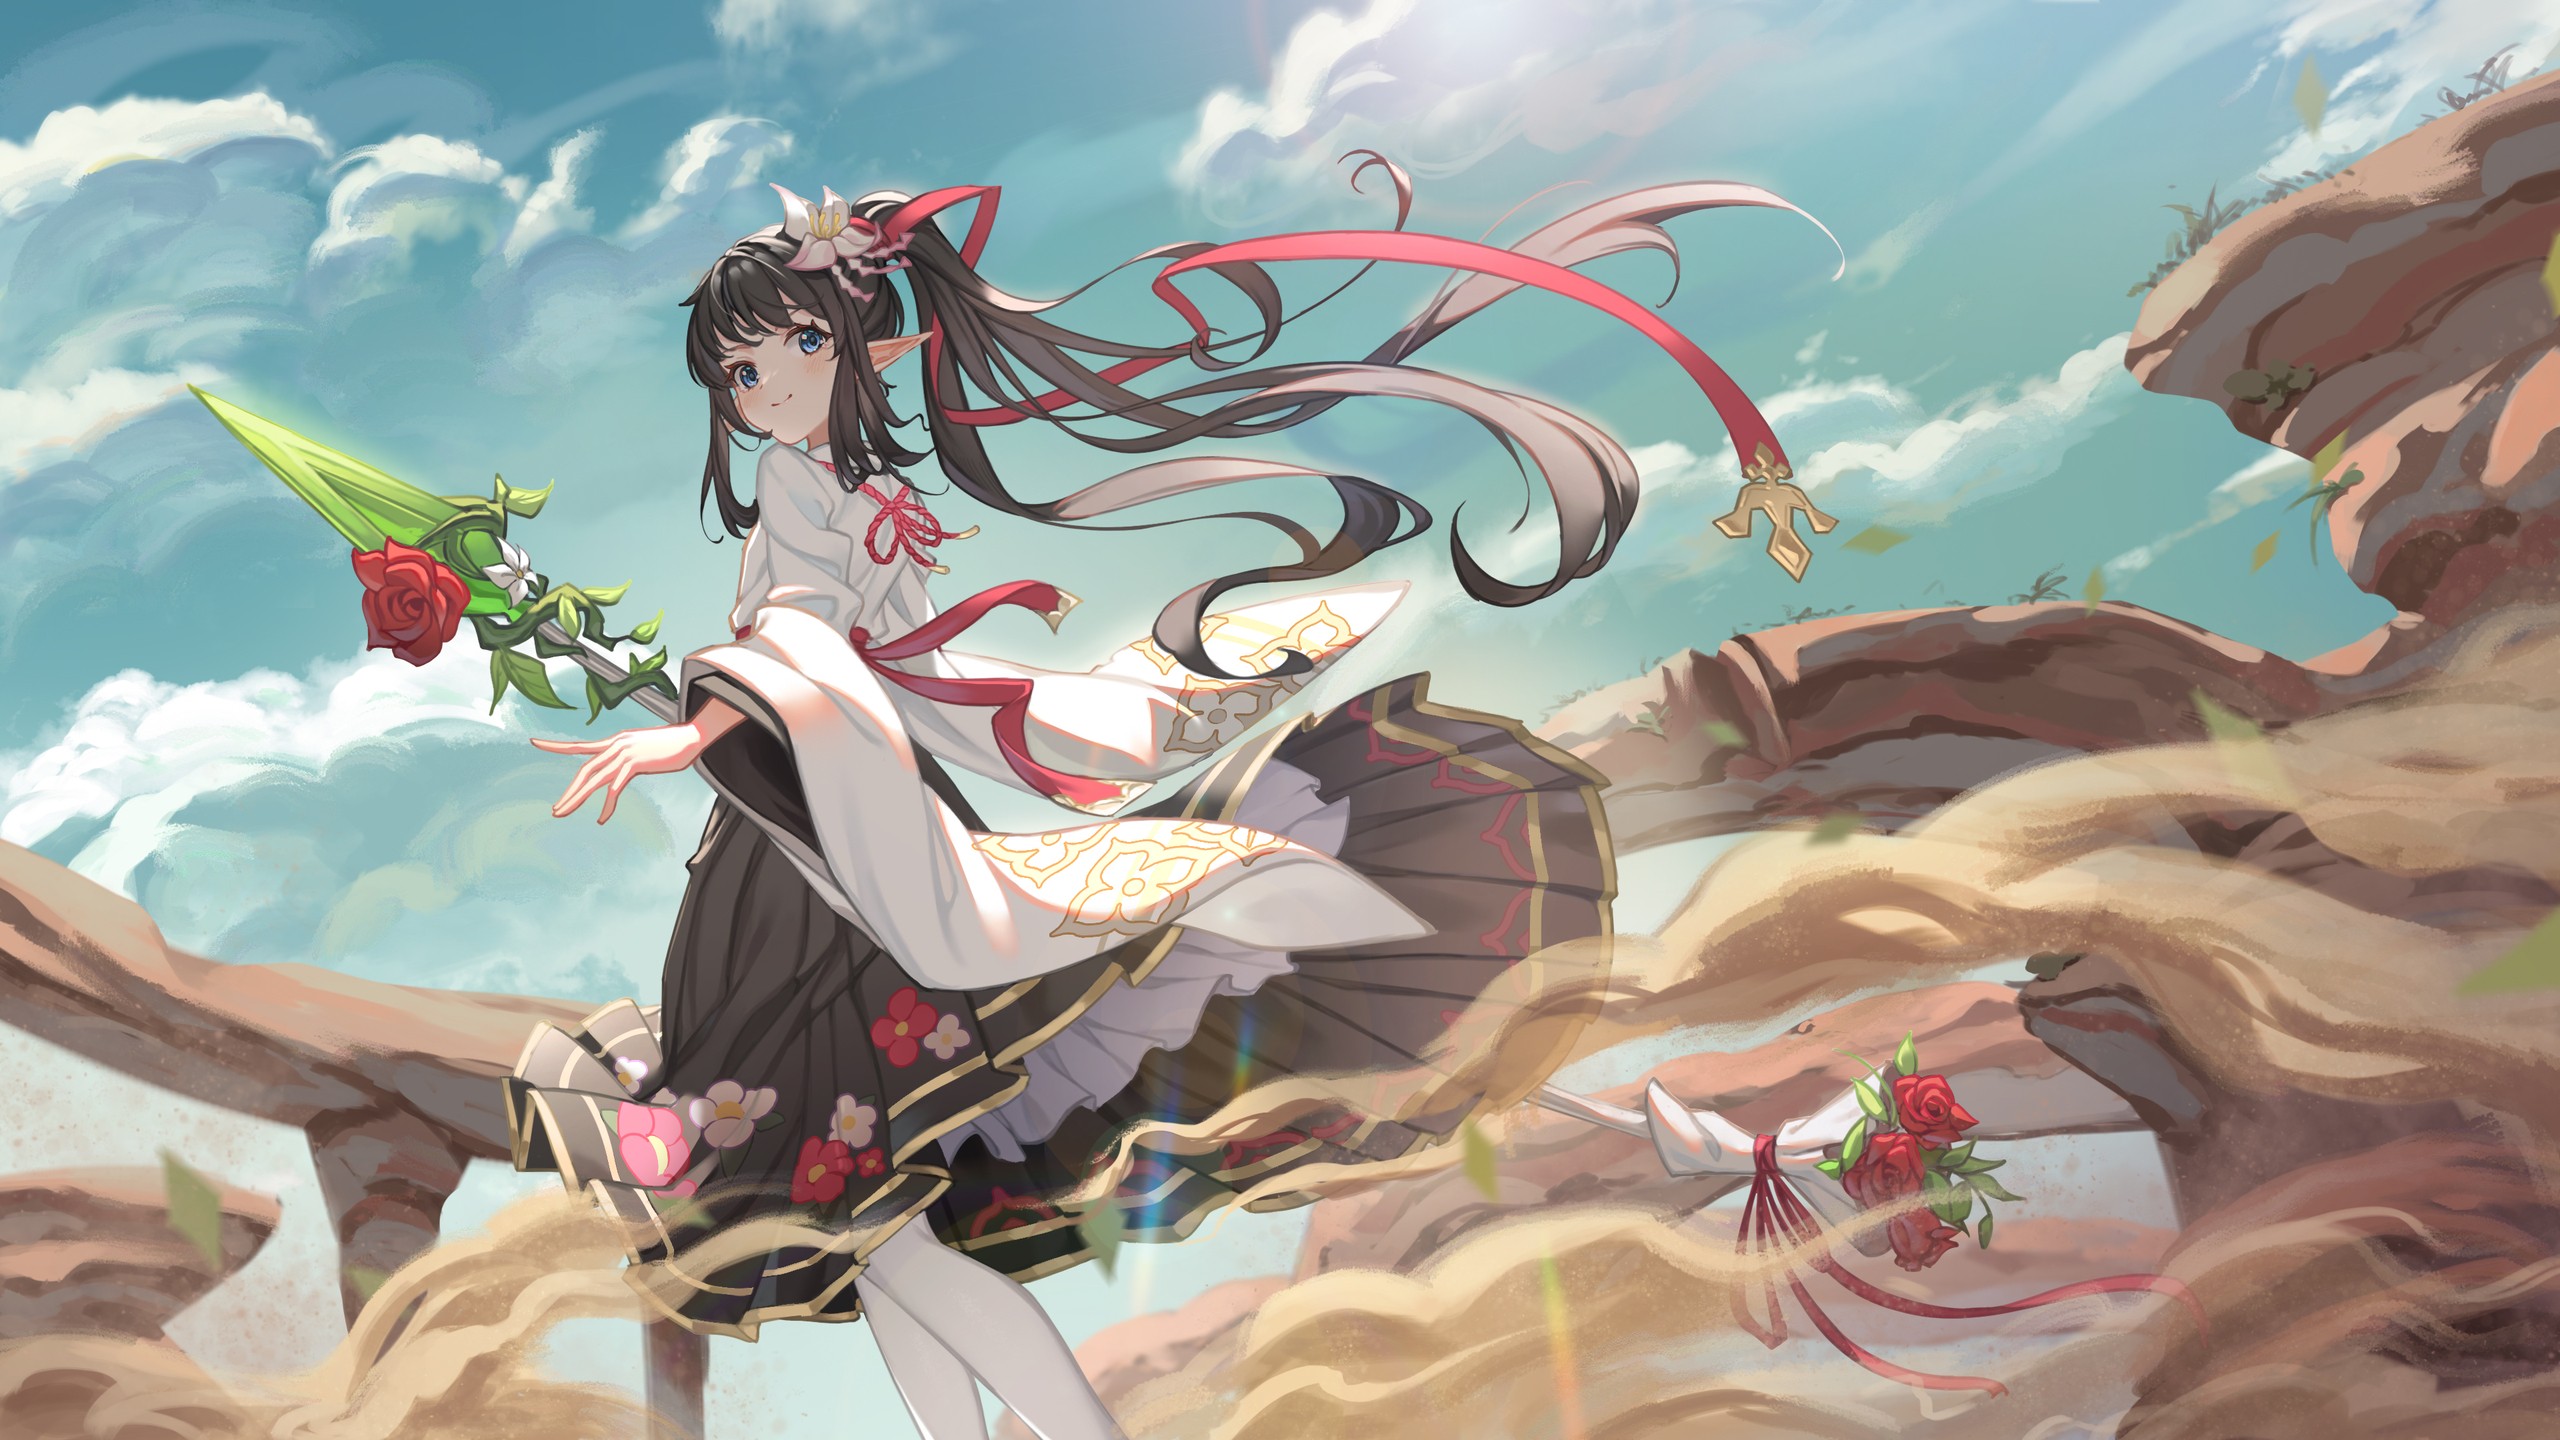 Anime Anime Girls Pointy Ears Blue Eyes Flowers Lance Weapon Clouds 2560x1440